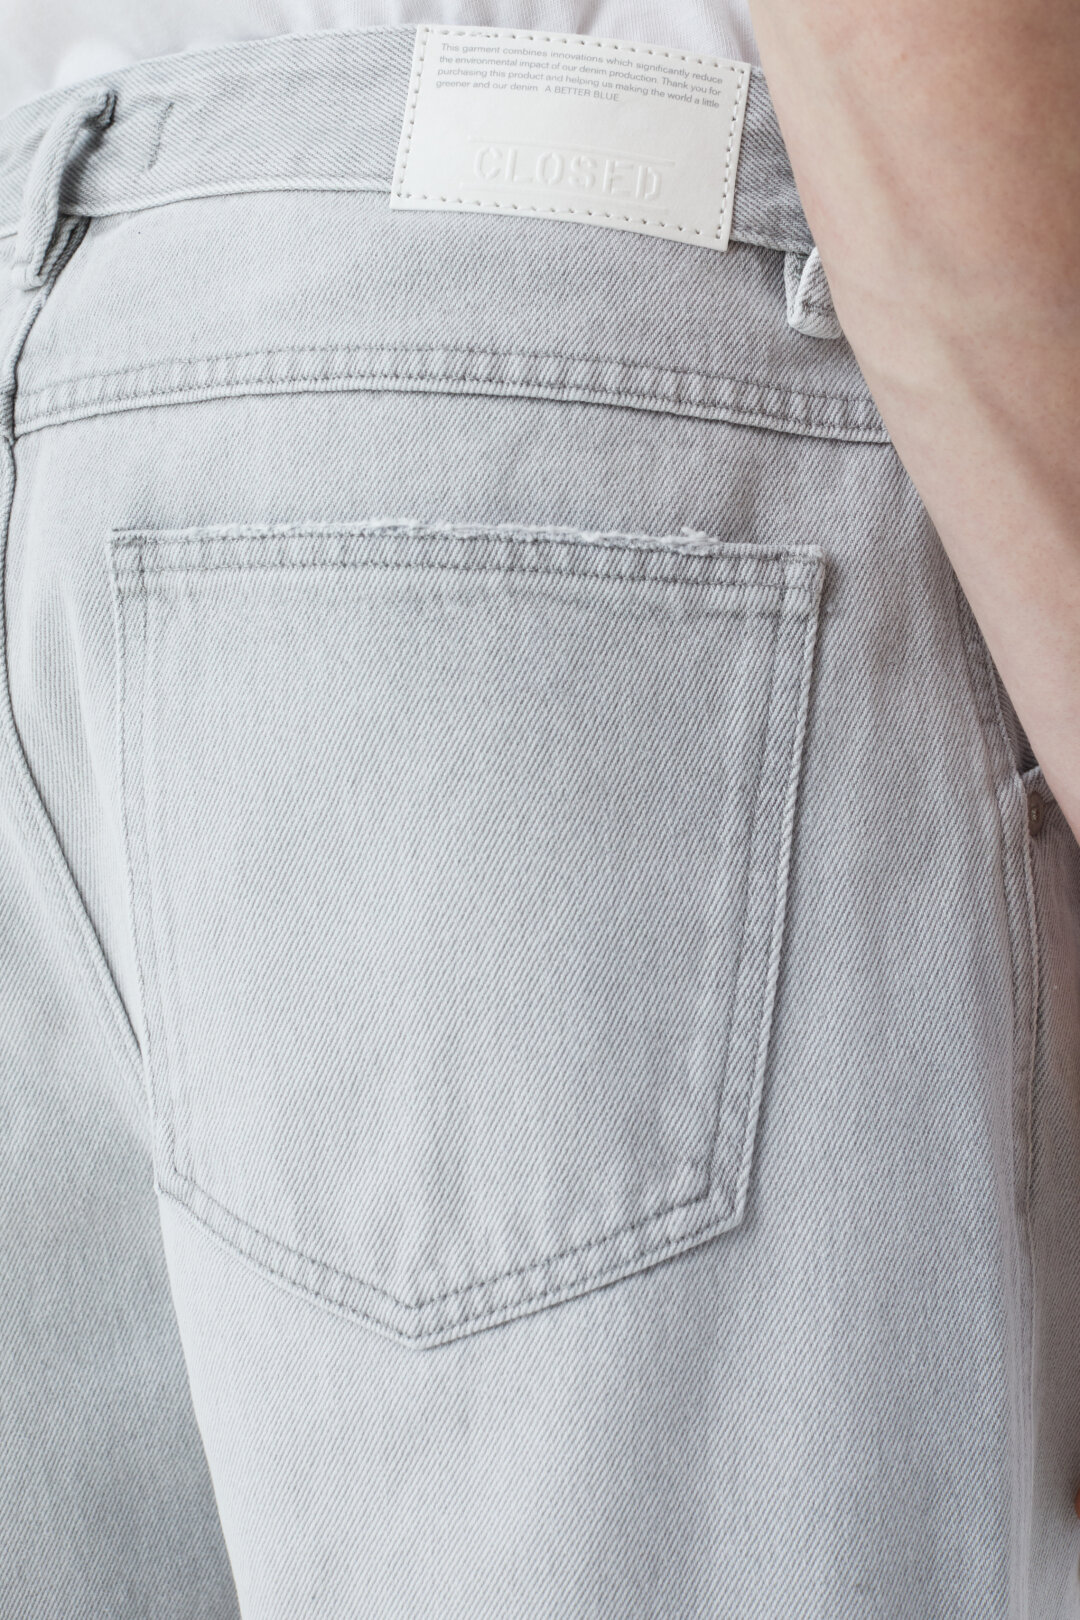 CLOSED X-Lent Tapered Jeans in Light Grey